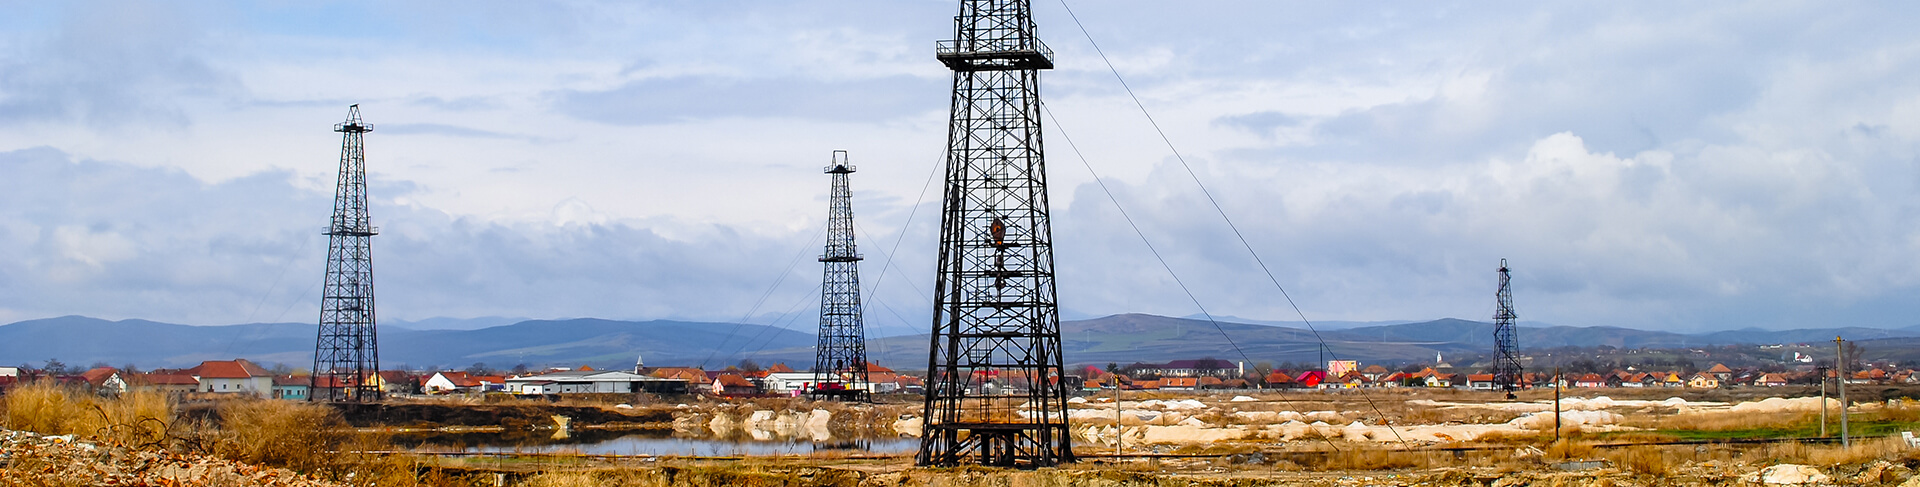 shale-oil-rig